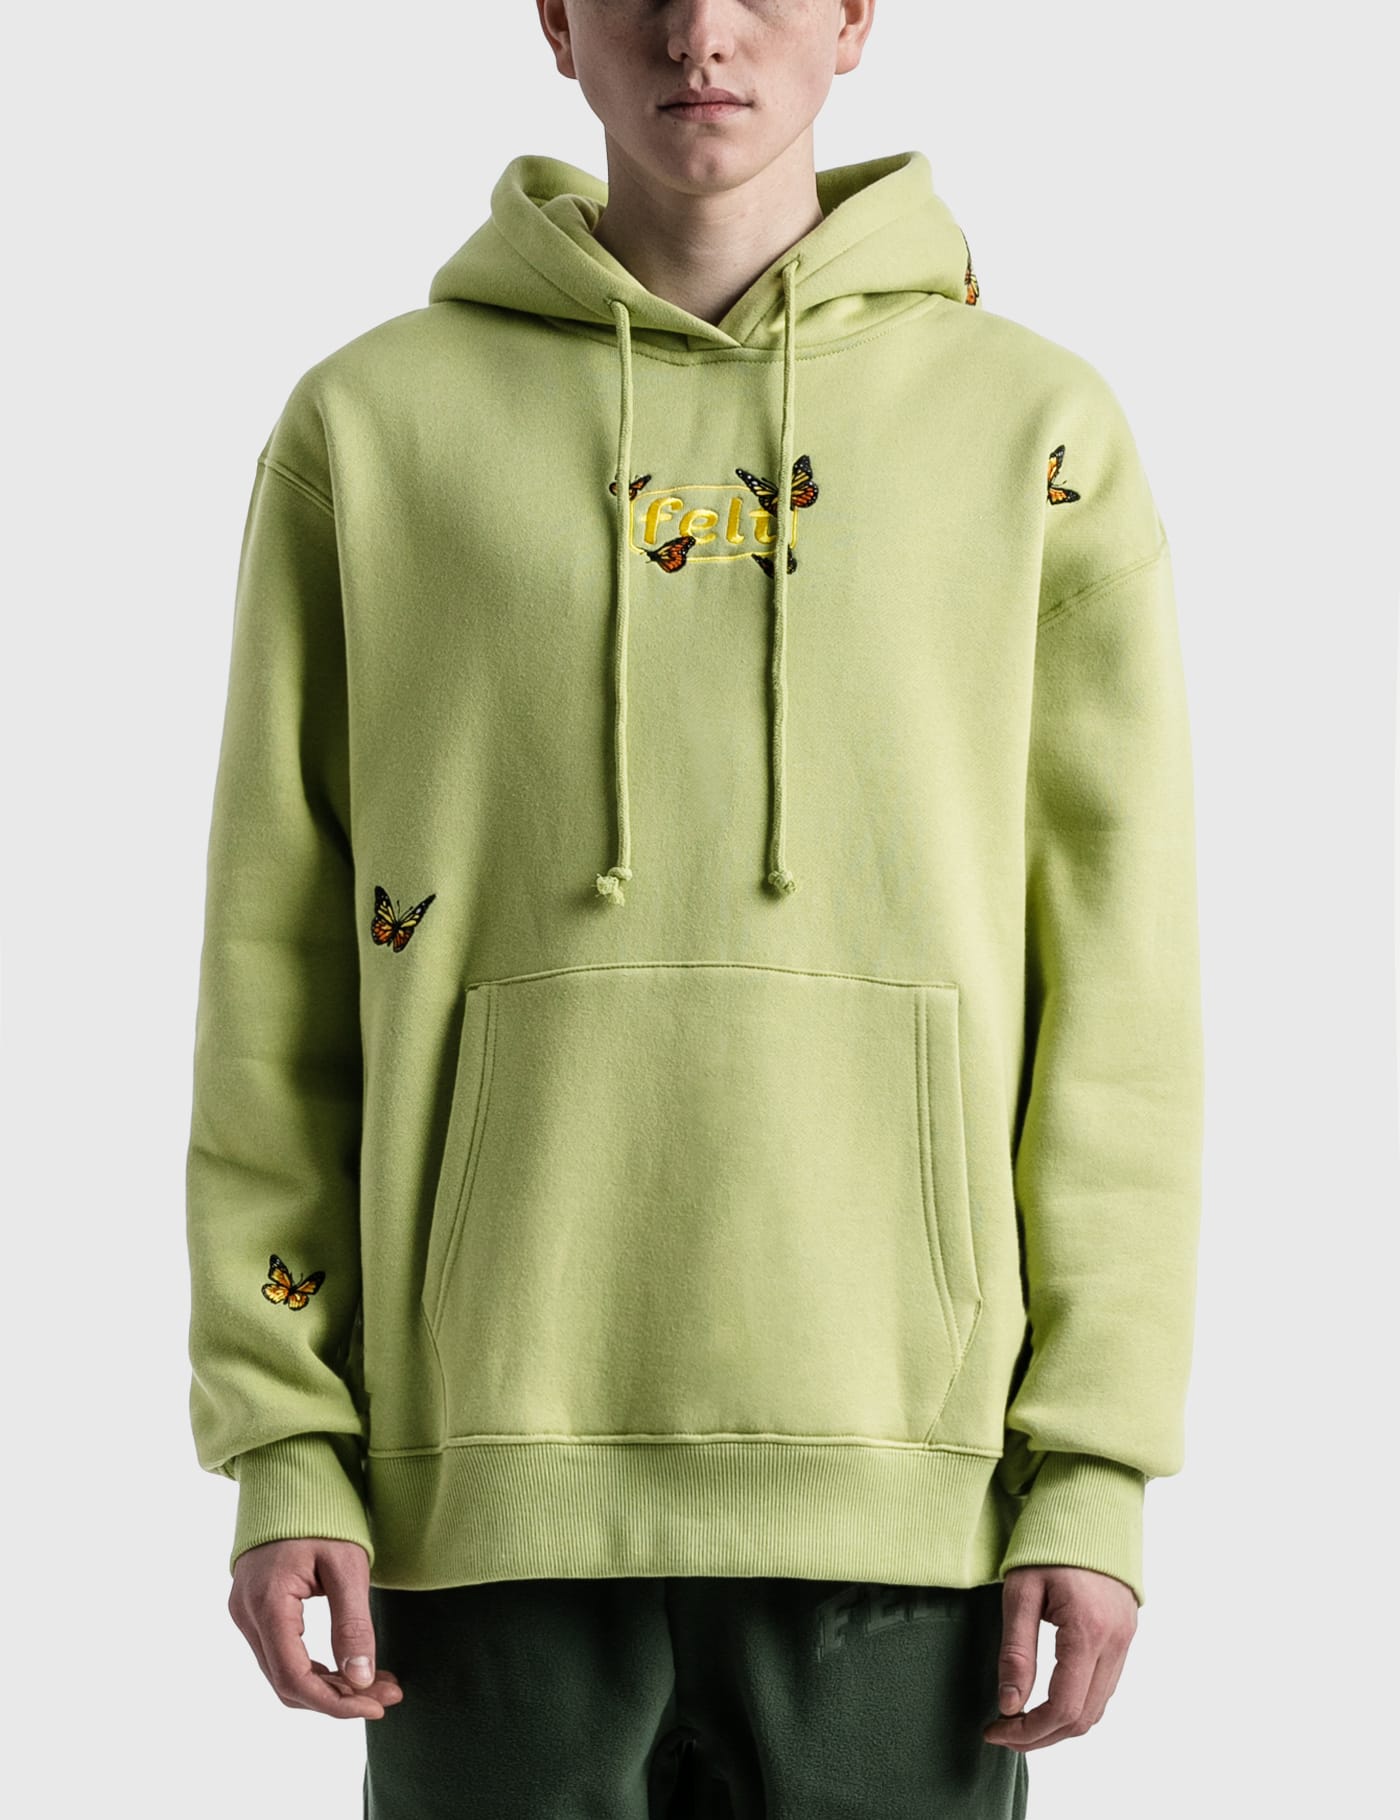 Felt - BUTTERFLY Garden HOODIE | HBX - Globally Curated Fashion and  Lifestyle by Hypebeast